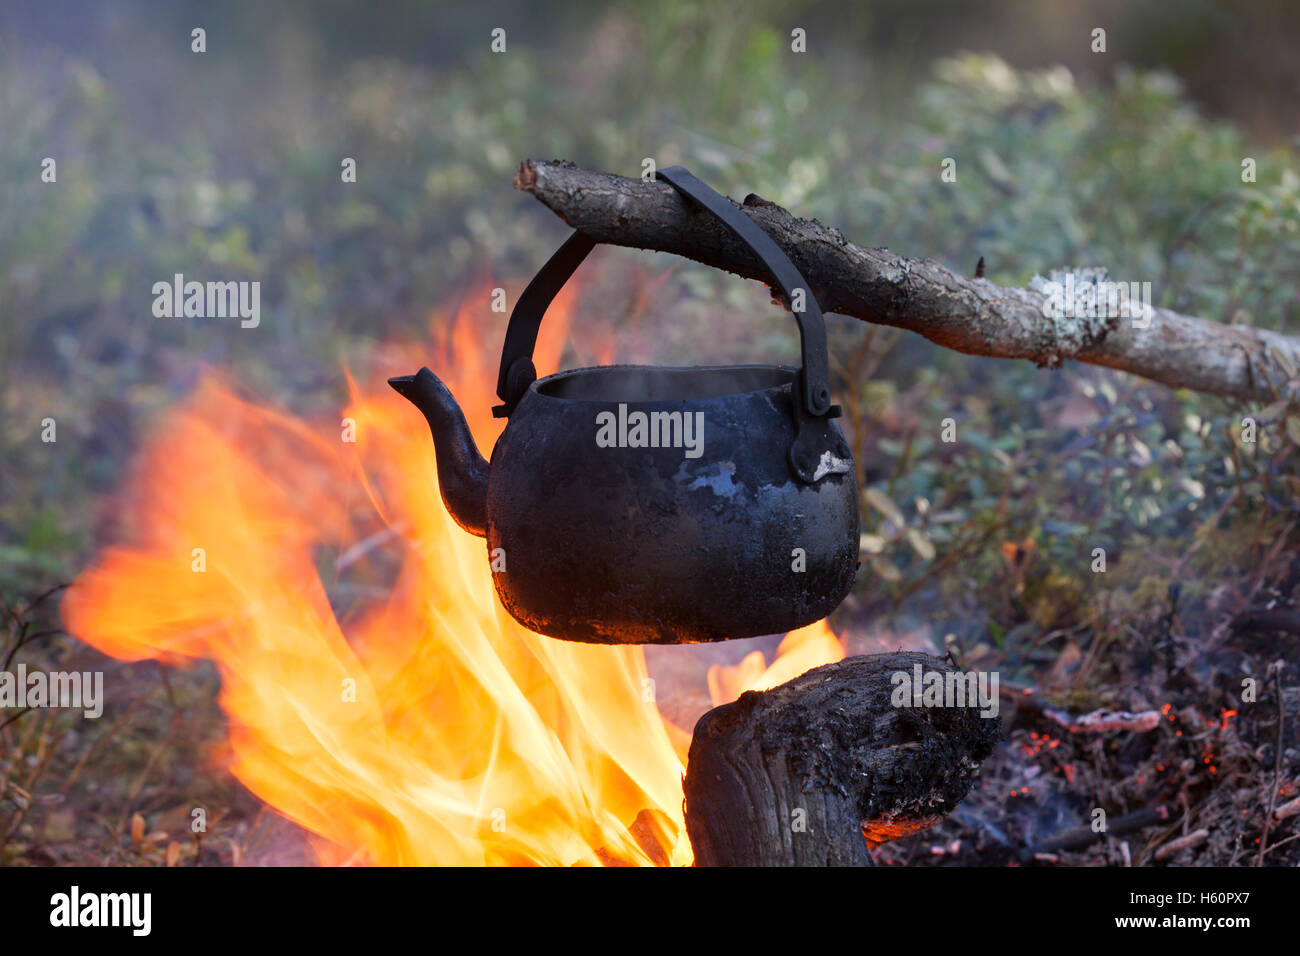 https://c8.alamy.com/comp/H60PX7/blackened-tin-kettle-from-soot-boiling-water-over-flames-from-campfire-H60PX7.jpg